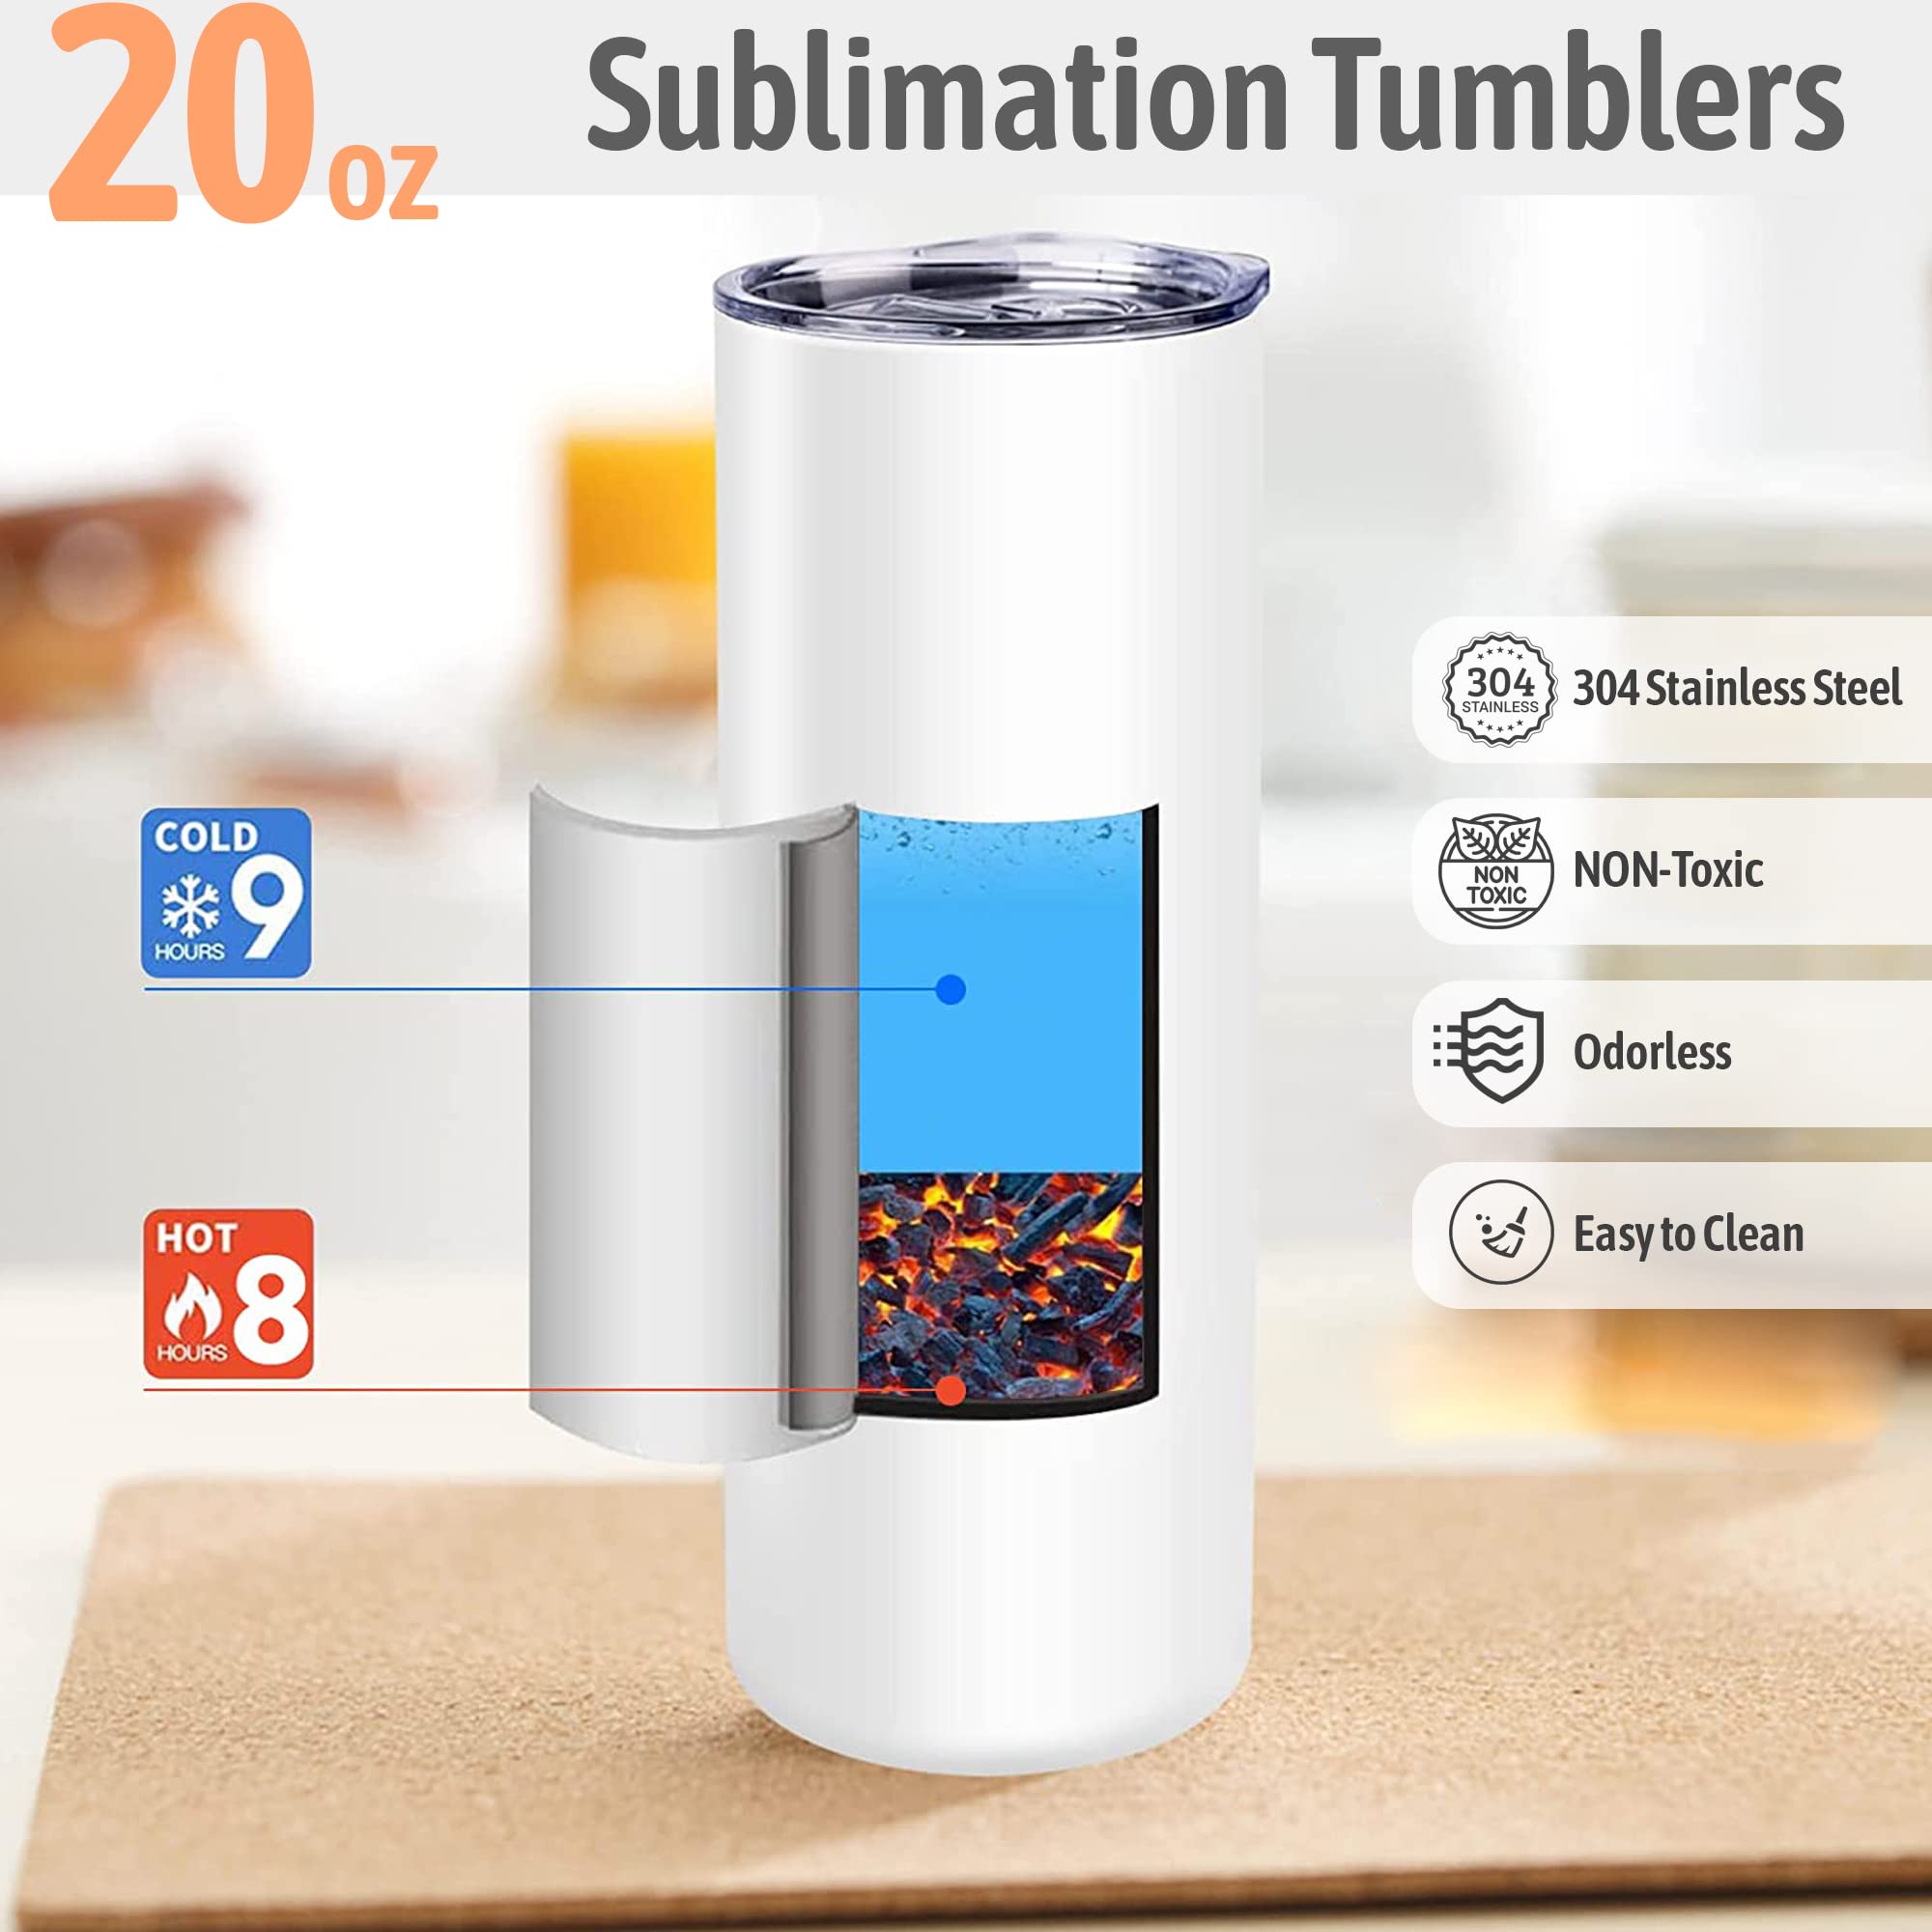 20 oz sublimation tumbler double-walled insulated cups